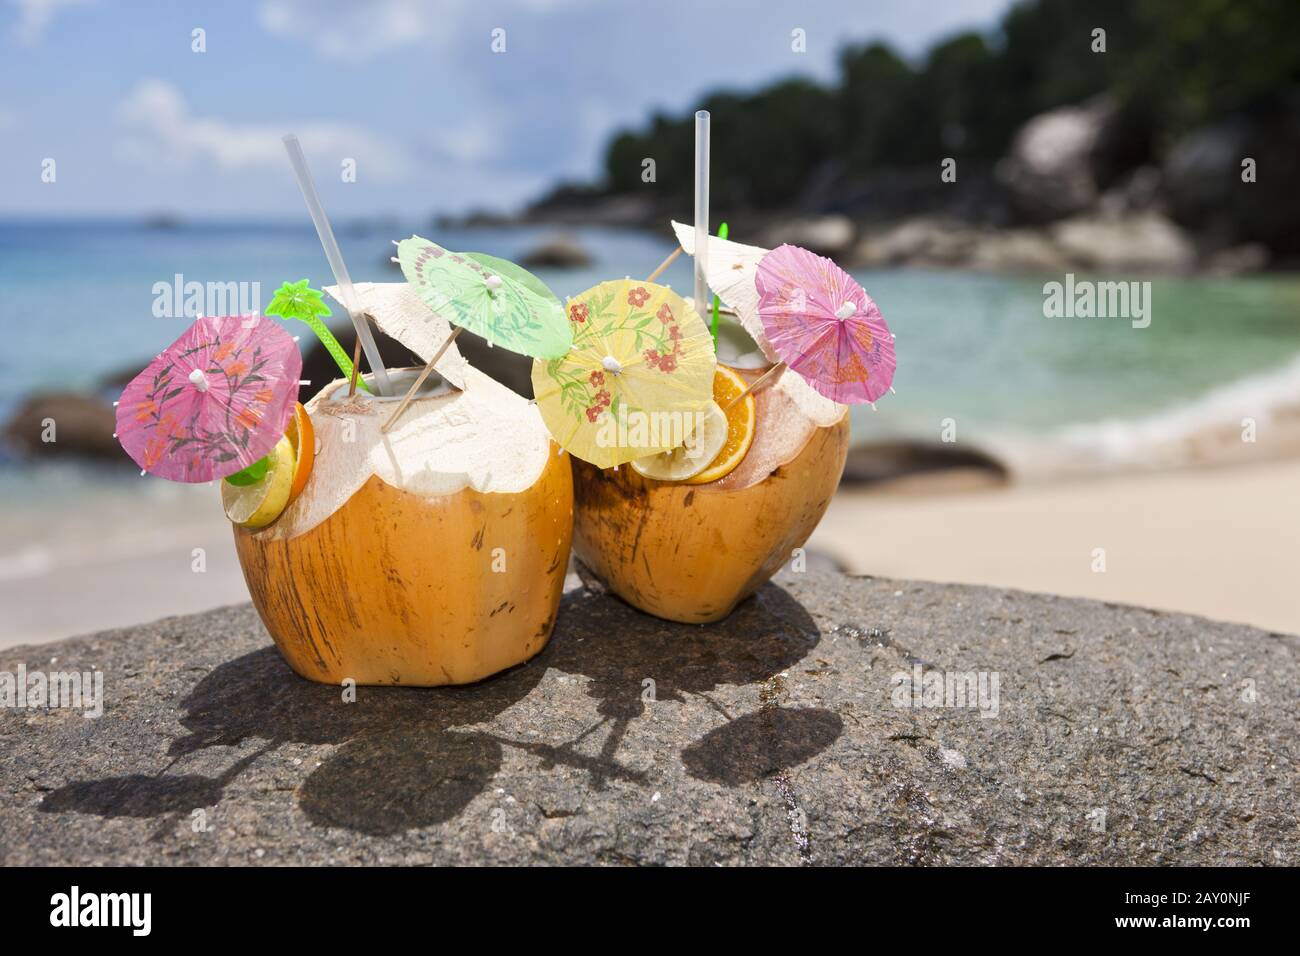 Two decorated coconuts filled with a drink stand on a granite rock Stock Photo